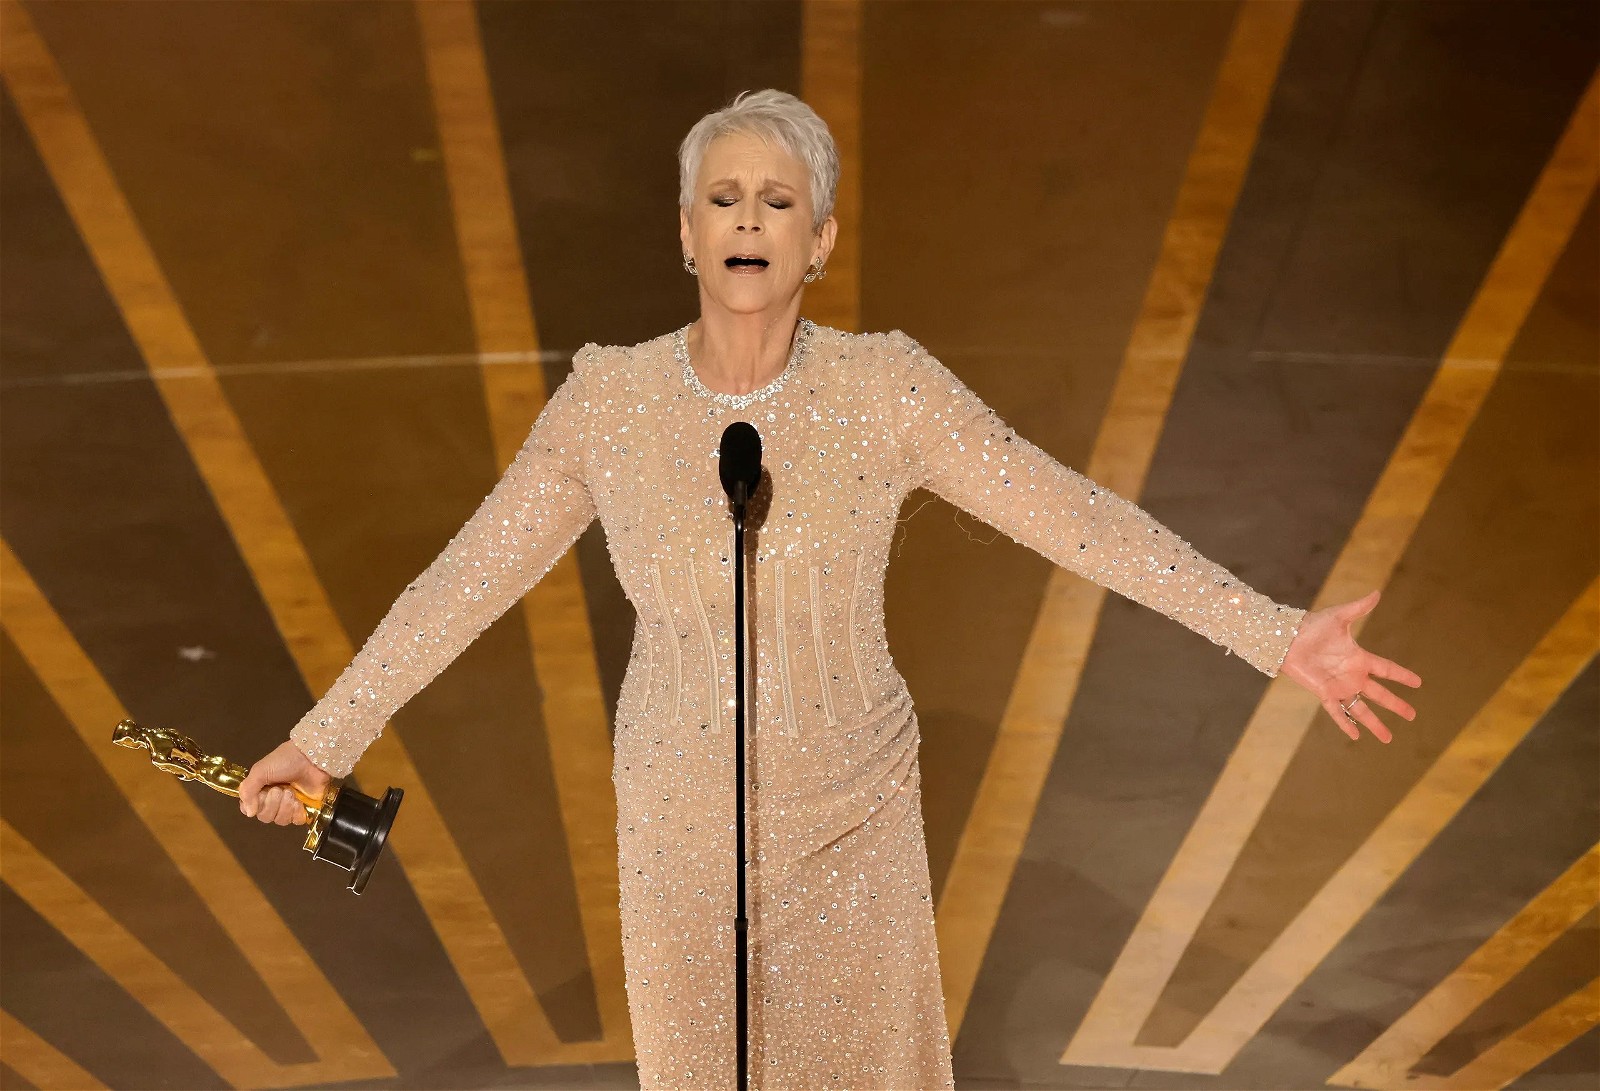 Jamie Lee Curtis wins Oscars for Everything Everywhere All at Once